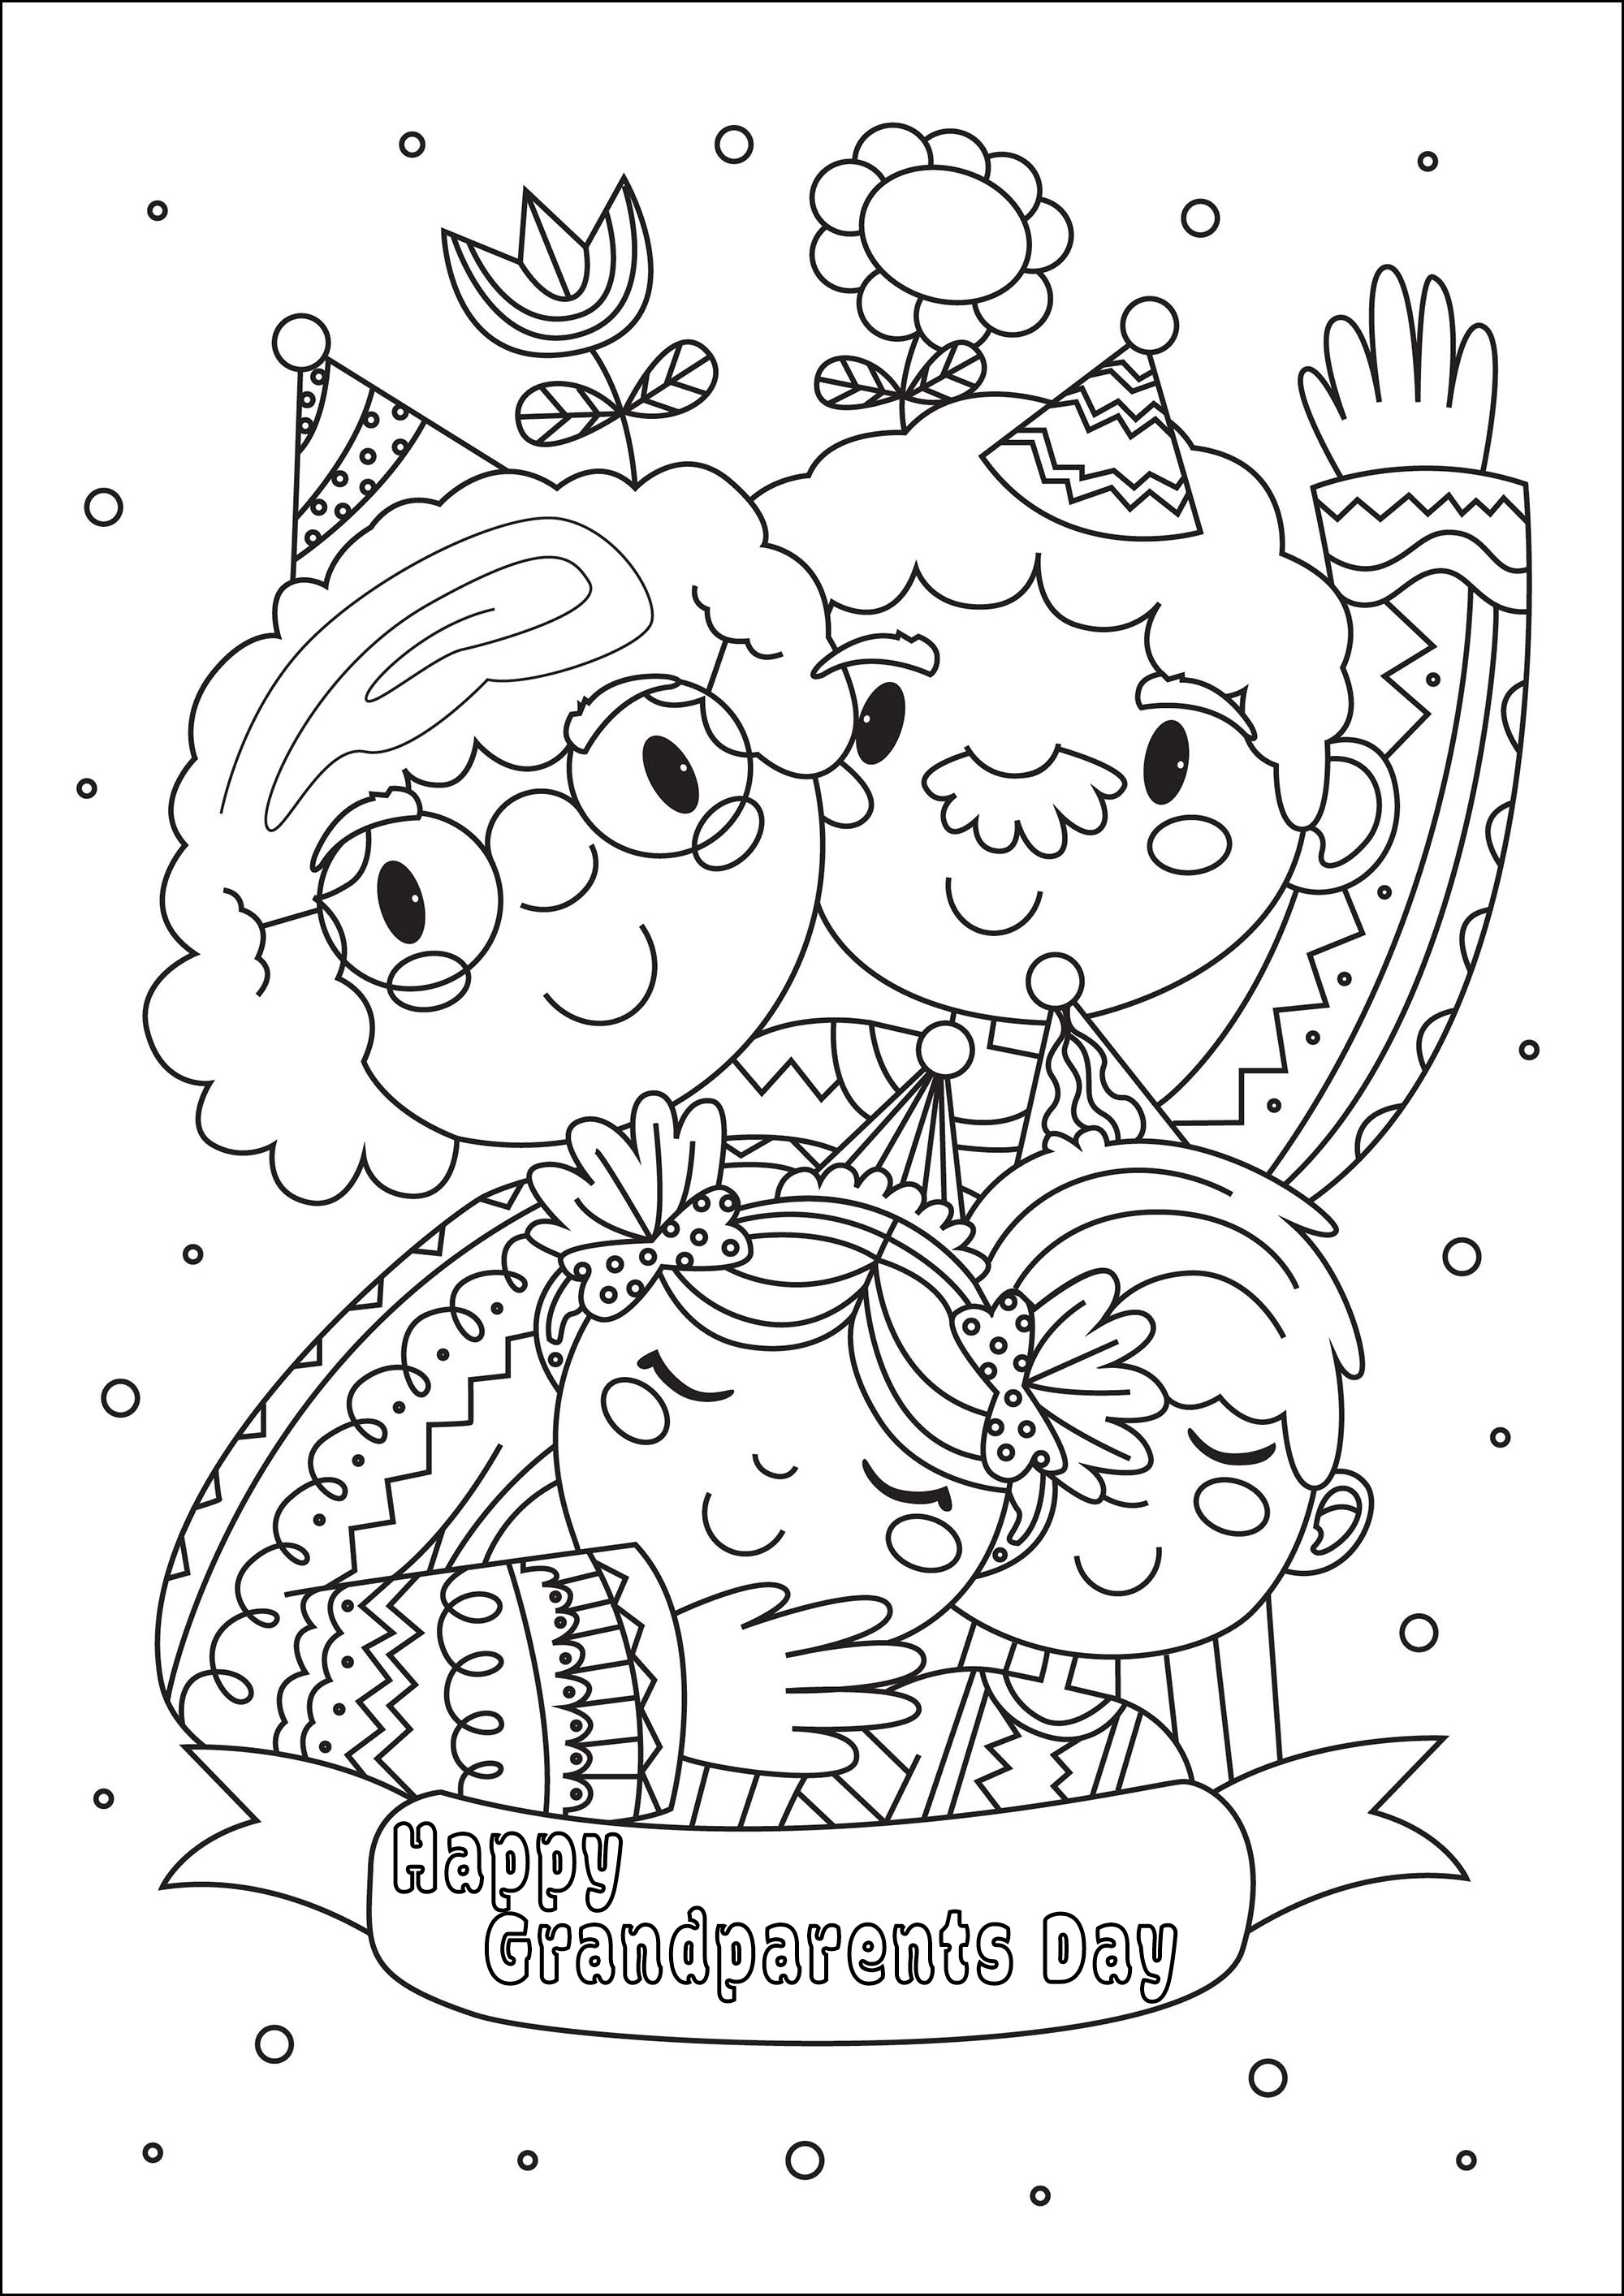 Coloring for Grandparents' Day. A beautiful coloring page with two children, their grandfather and grandmother, Artist : Gaelle Picard